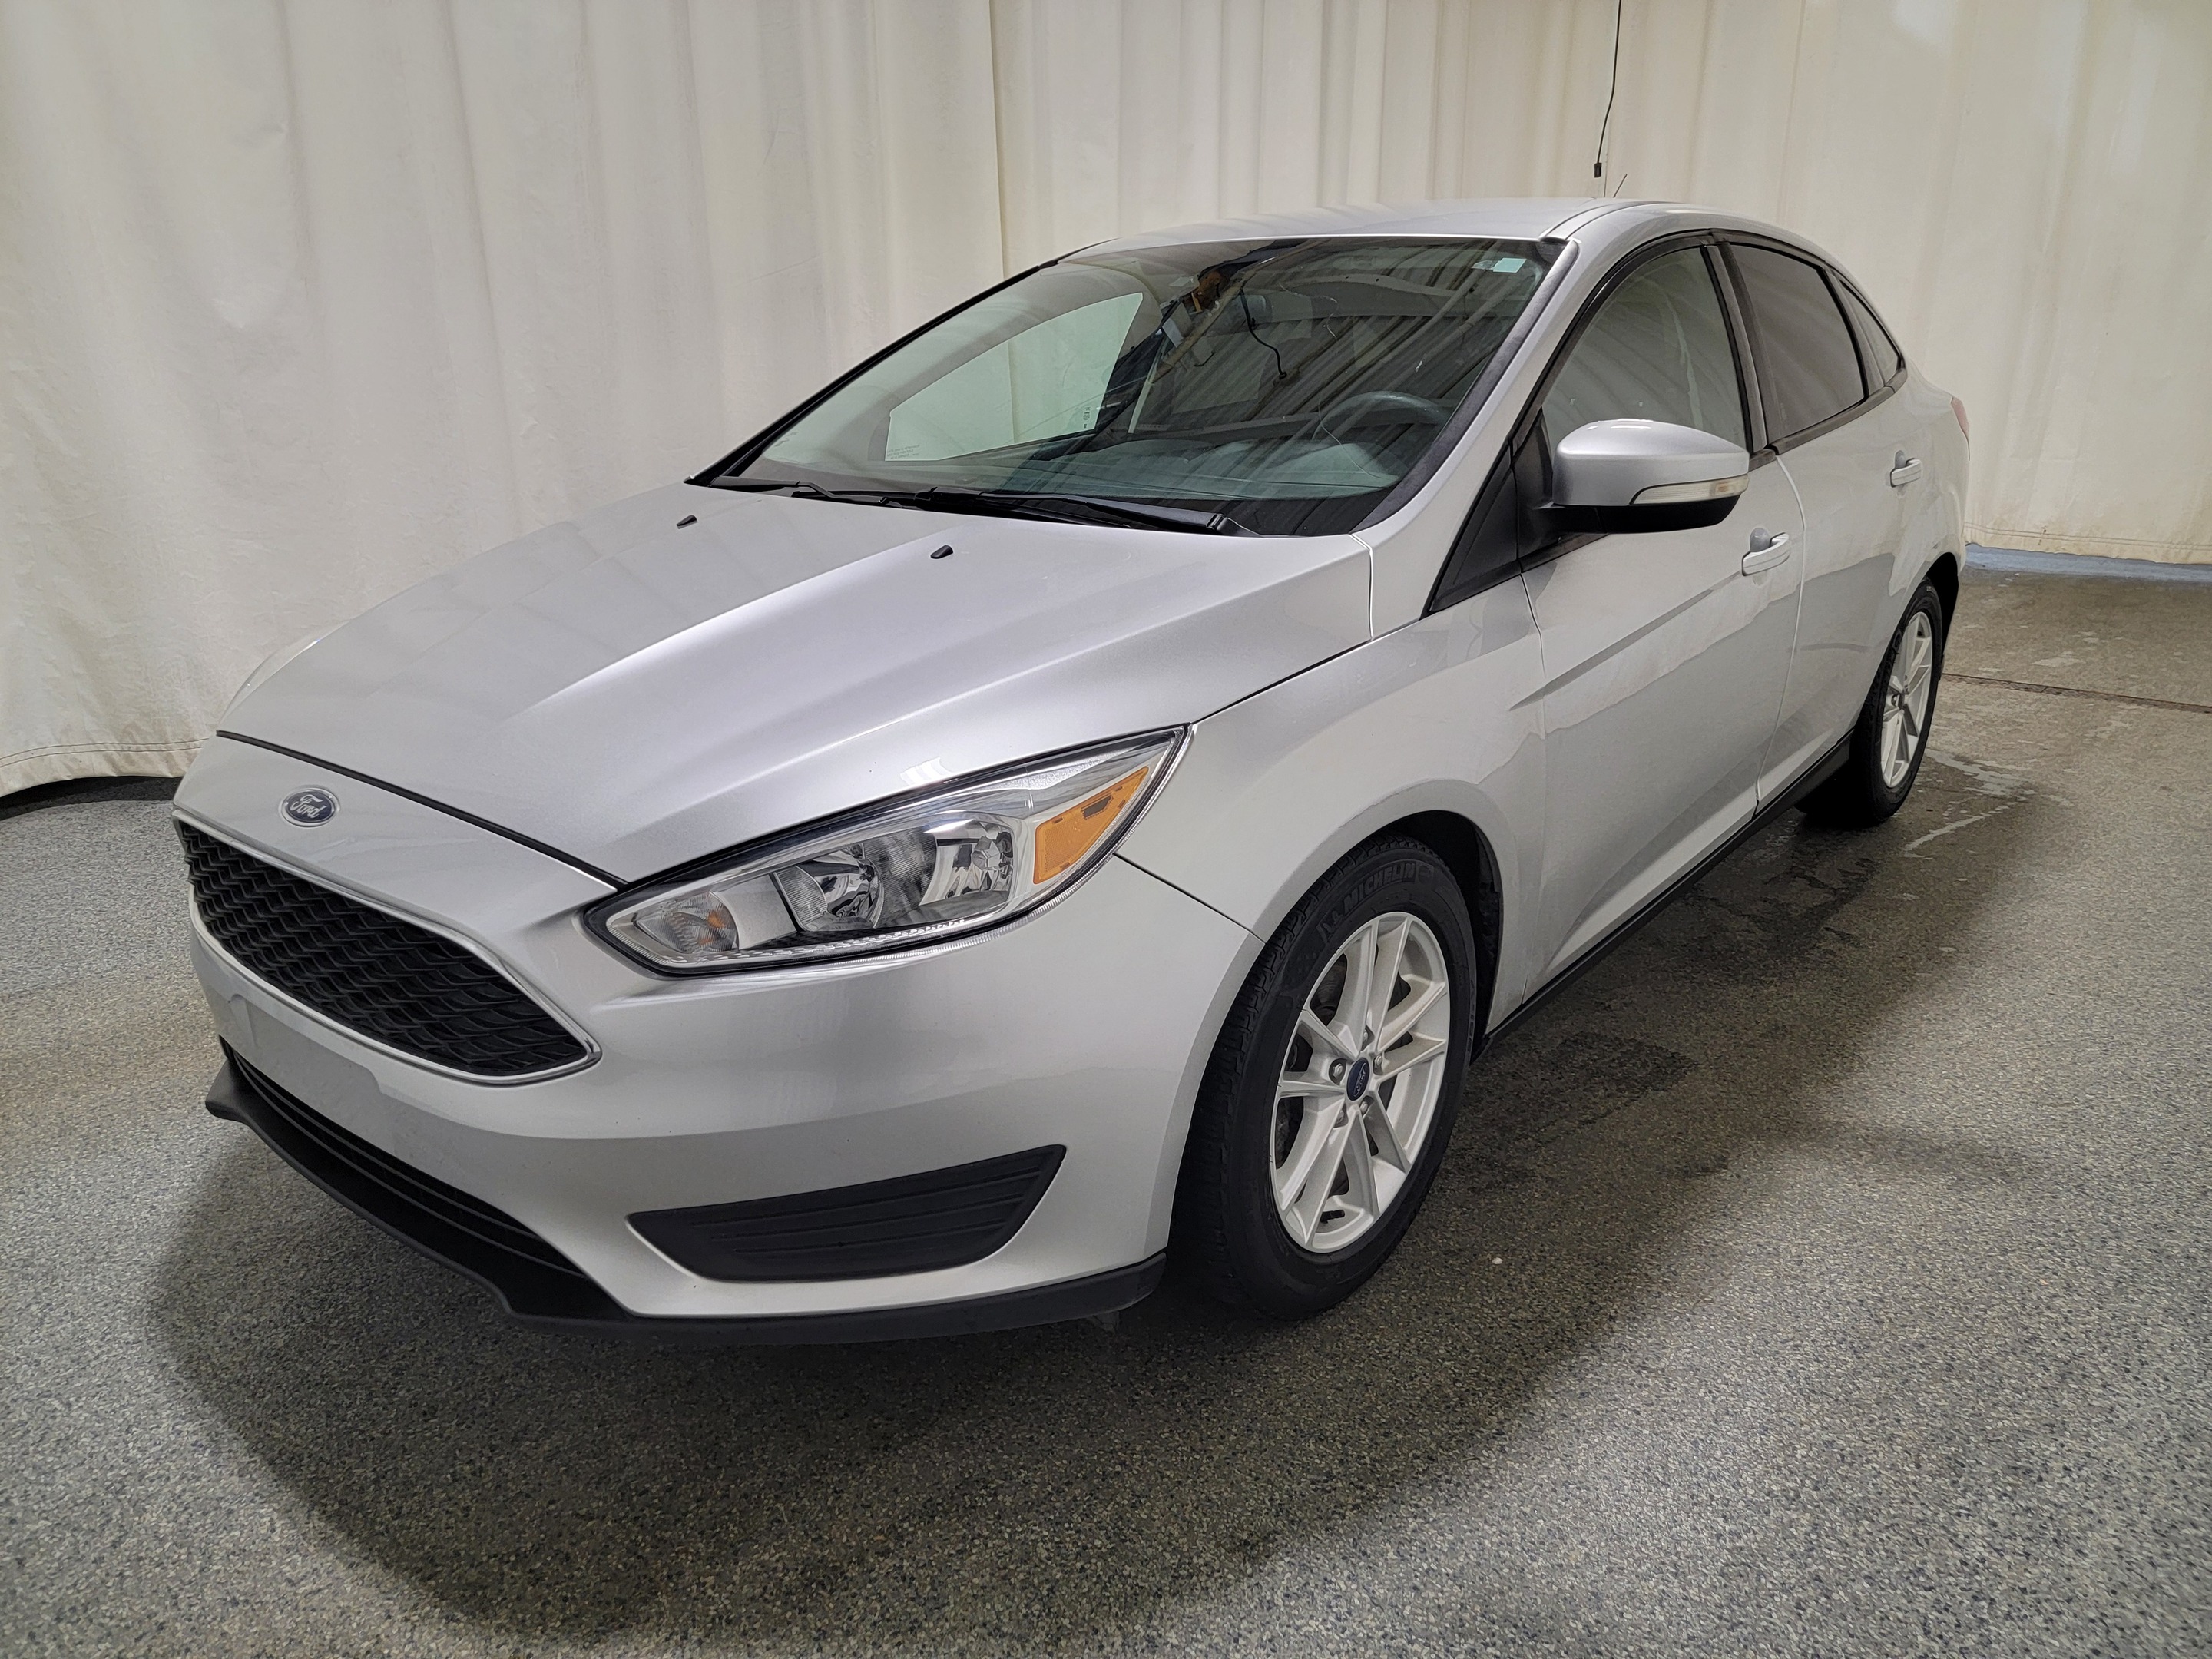 2017 Ford Focus 4dr Sdn SE